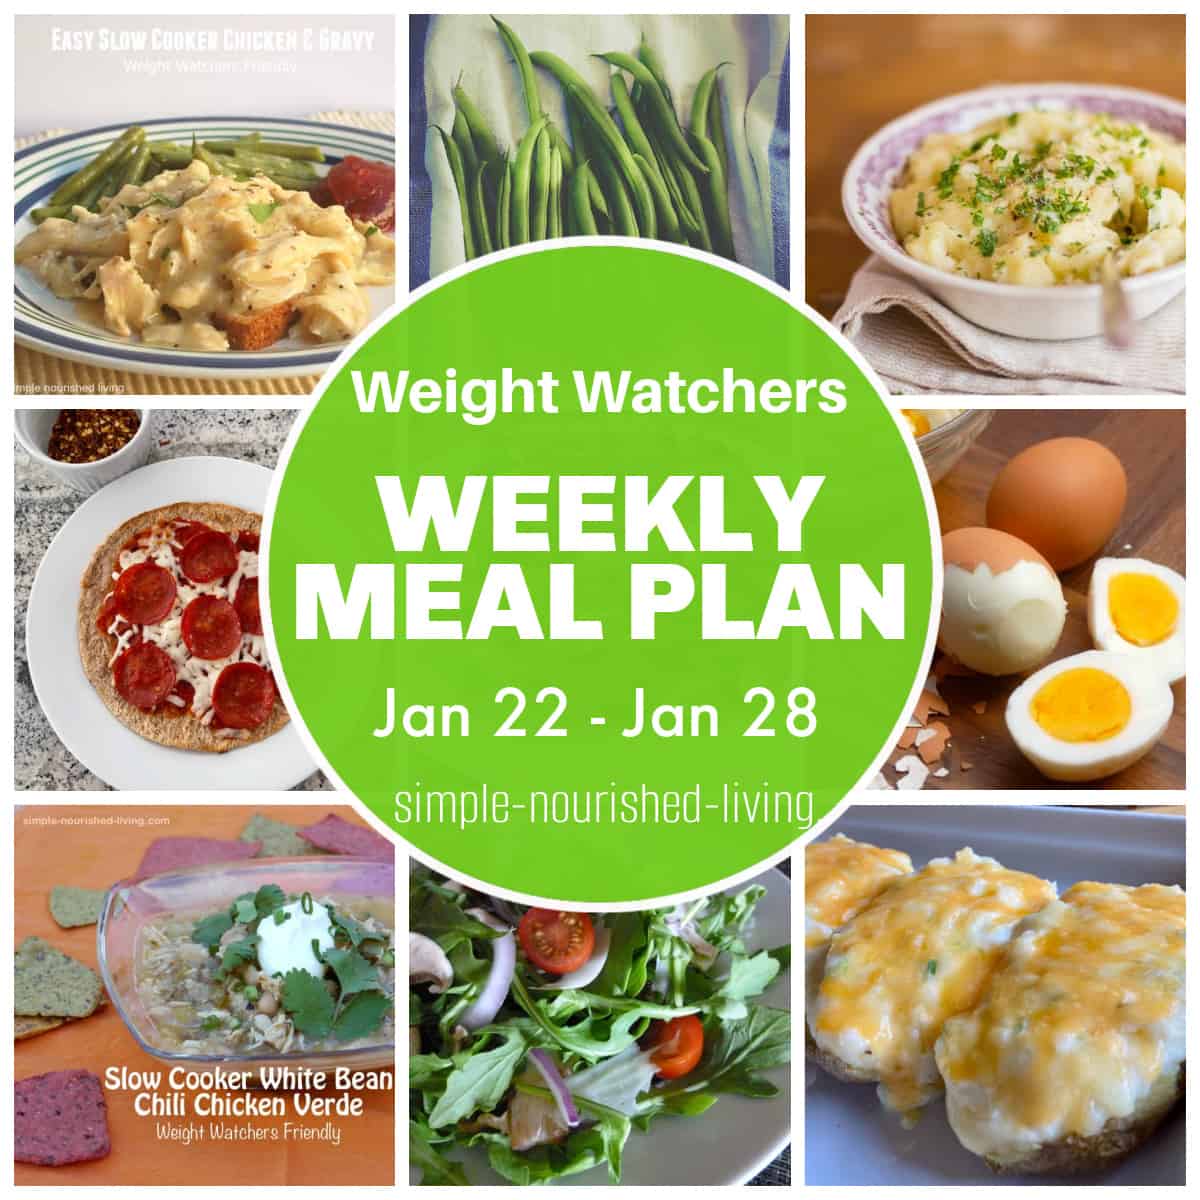 WeightWatchers Meal Plan Food Photo Collage with Text